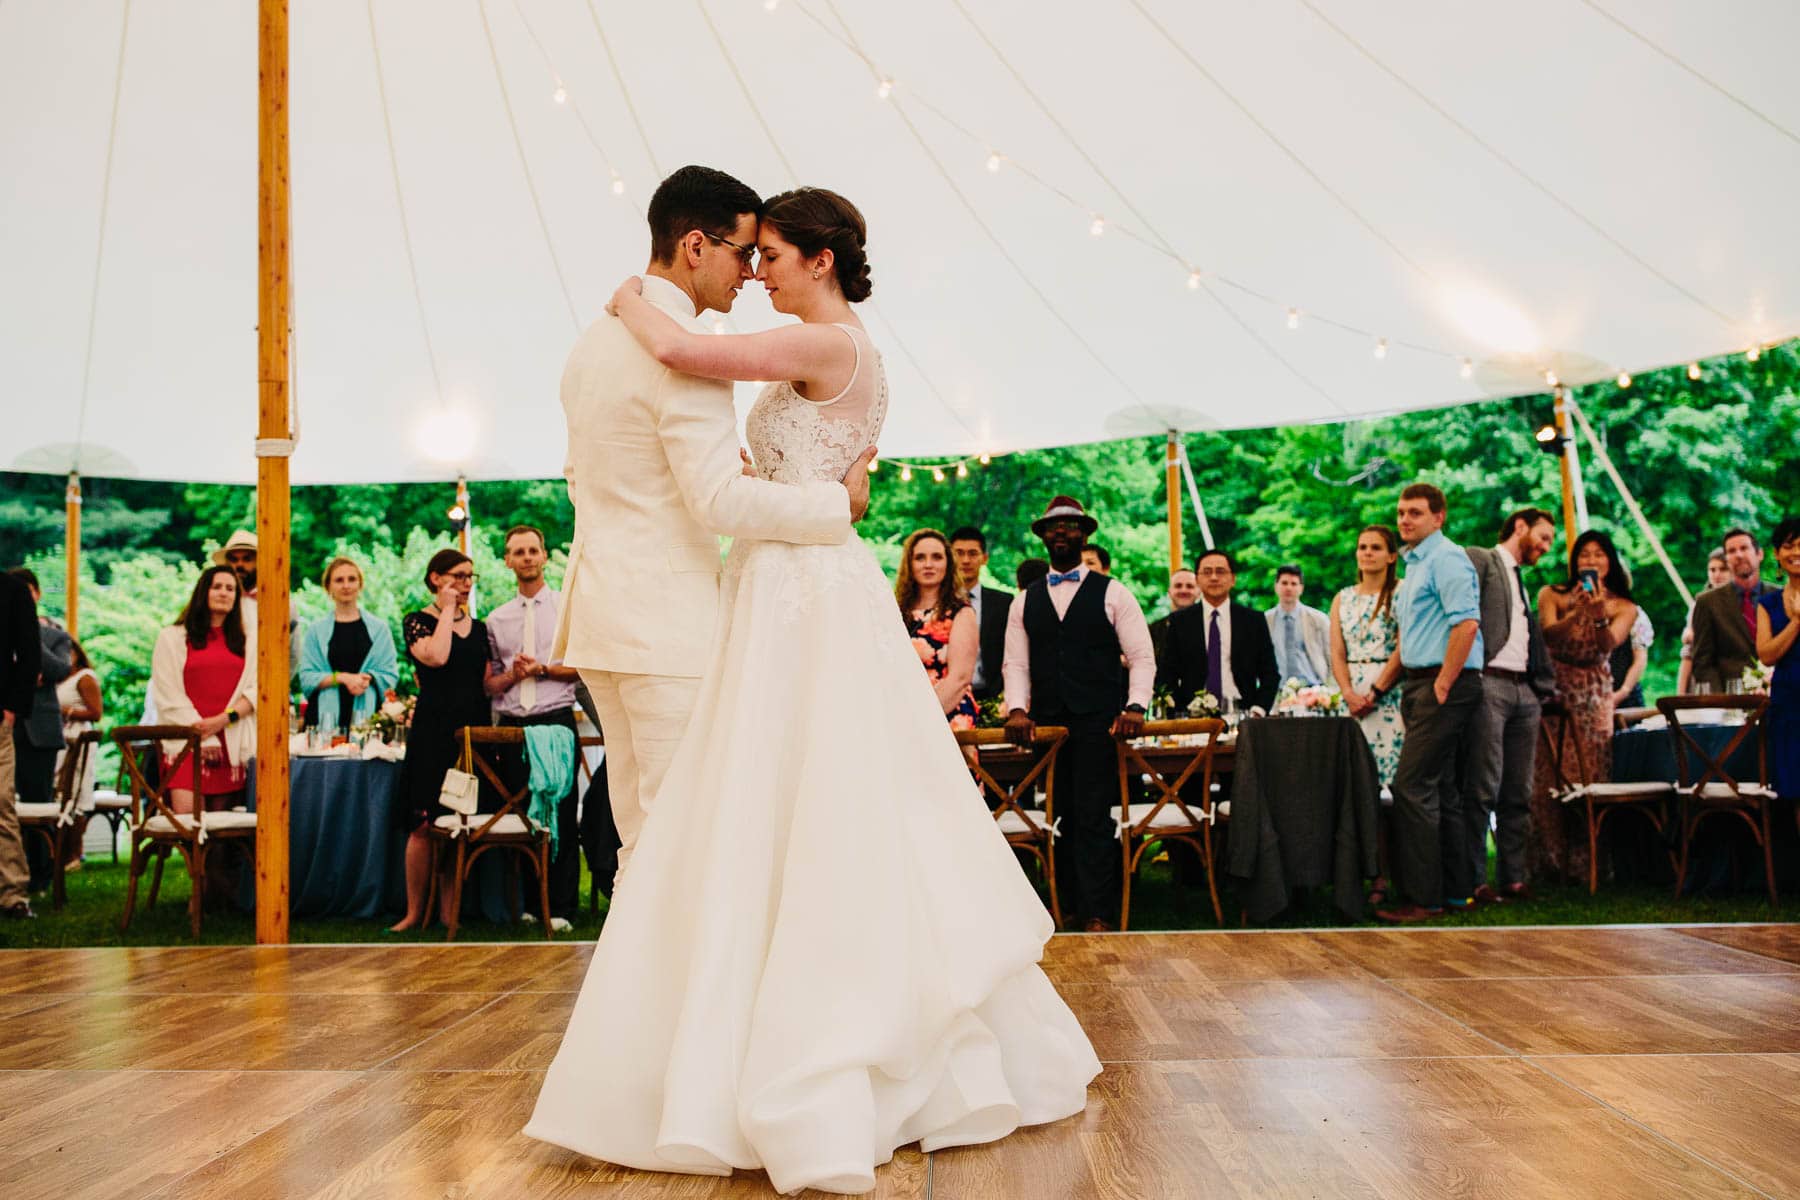 the couple's first dance at their elegant backyard wedding, Kent, Connecticut